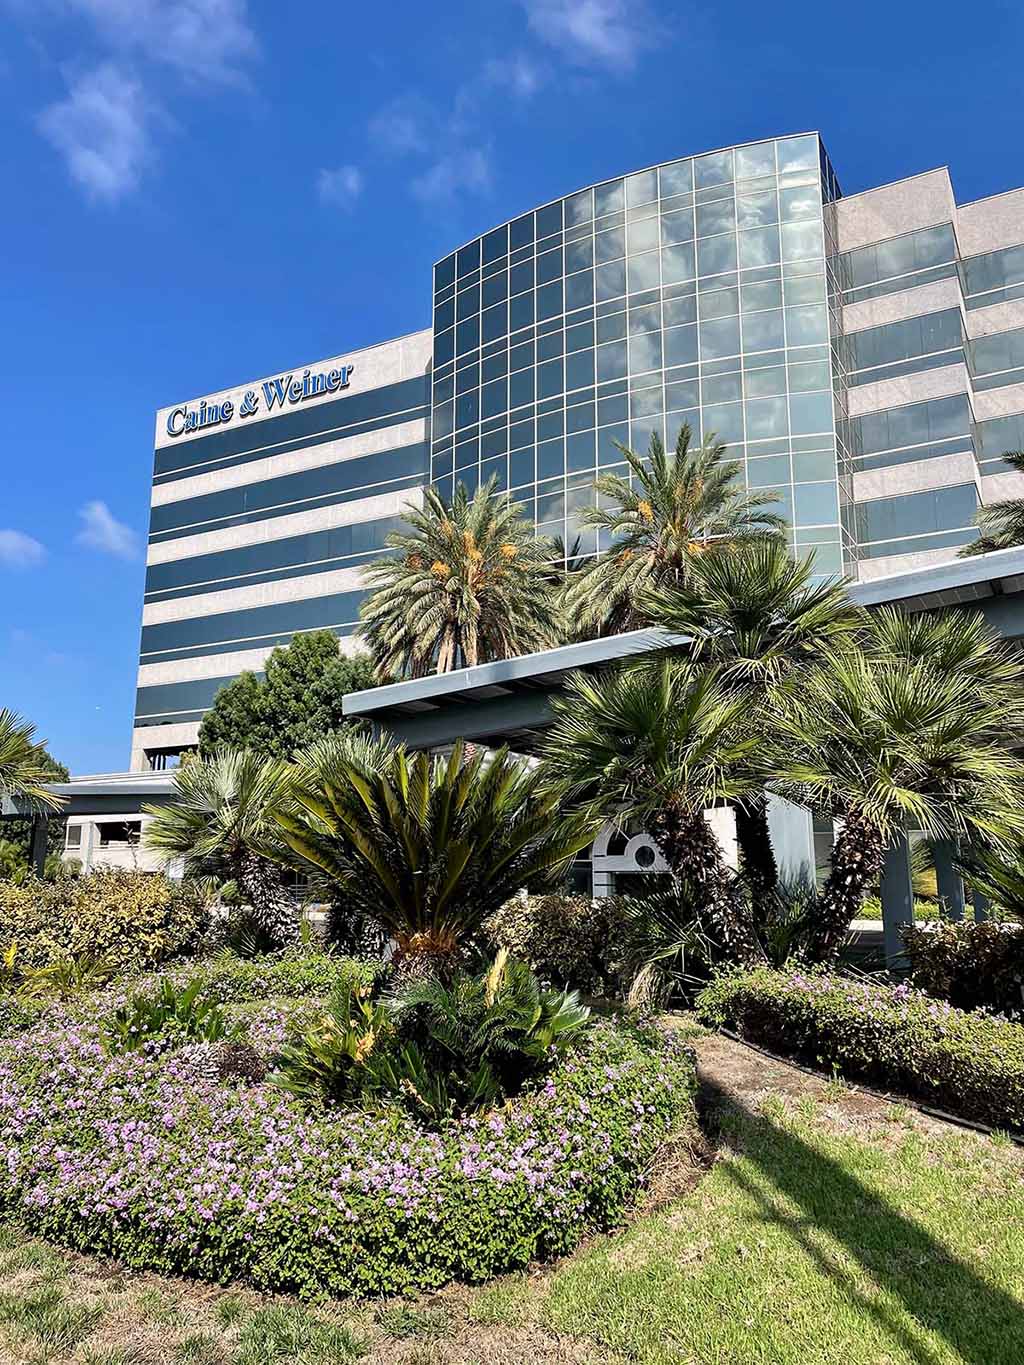 Southern California Multi-Specialty Center serves patients from Los Angeles